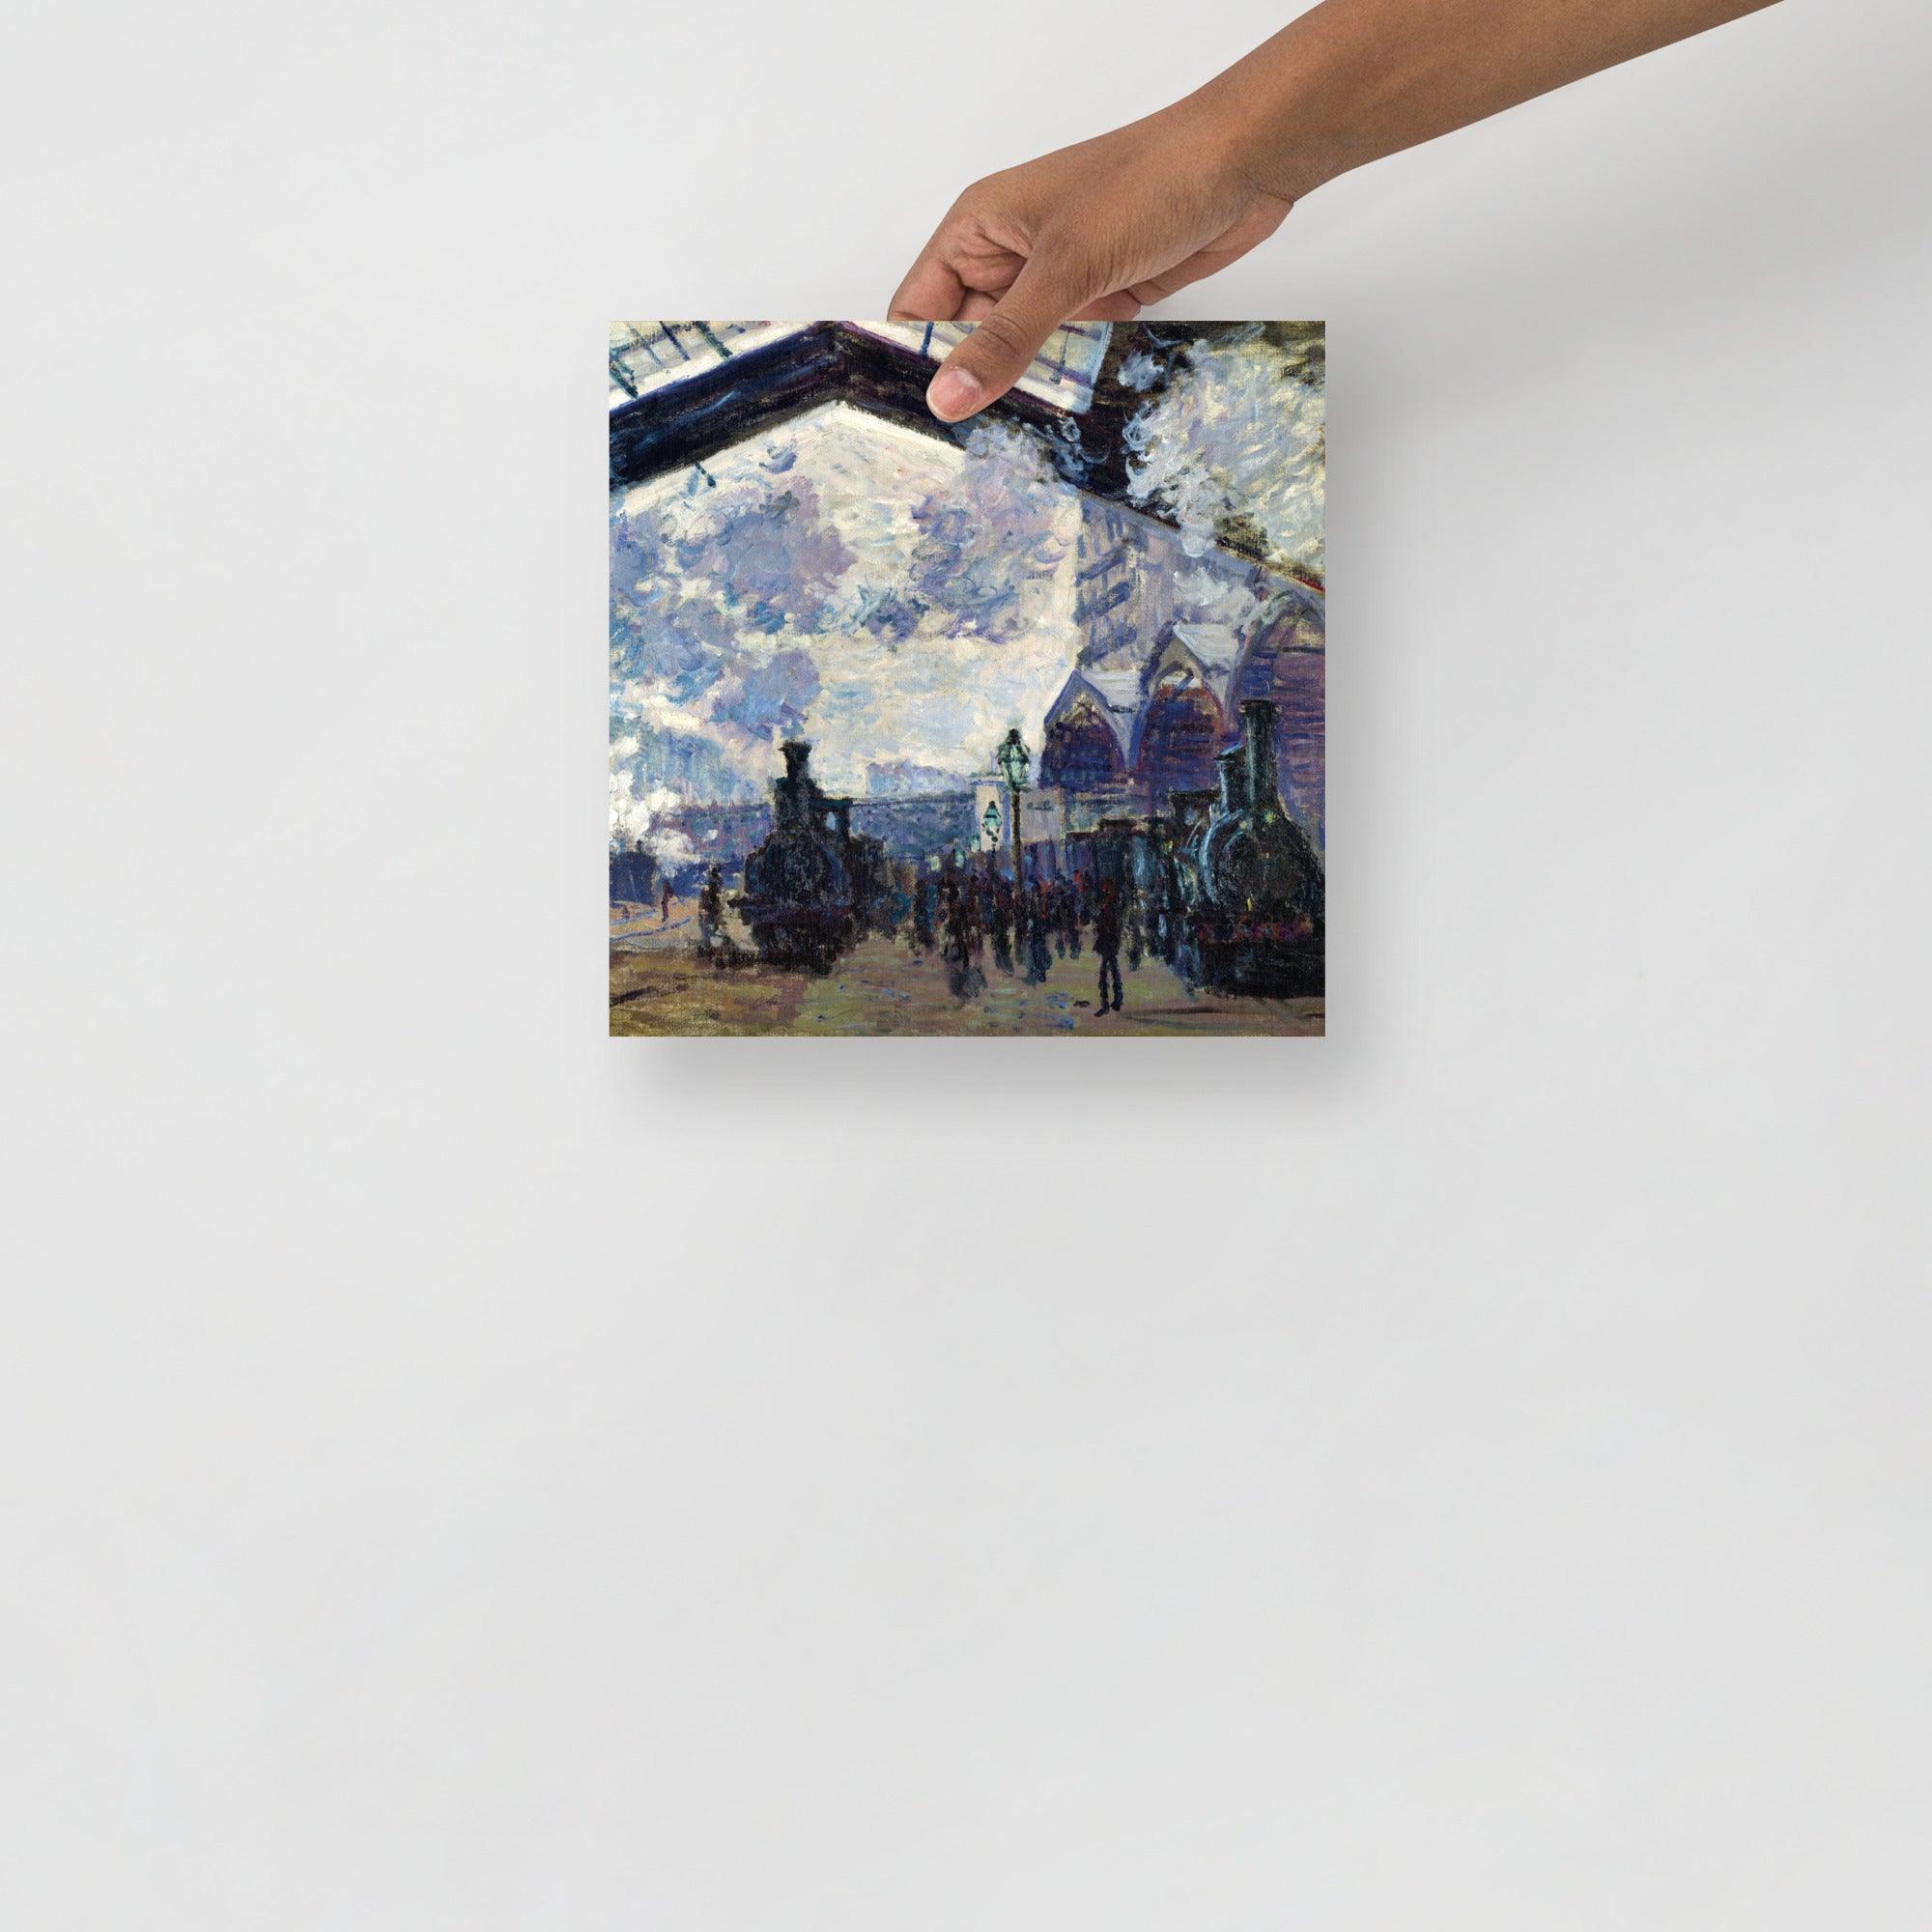 The Gare St-Lazare by Claude Monet  poster on a plain backdrop in size 10x10”.